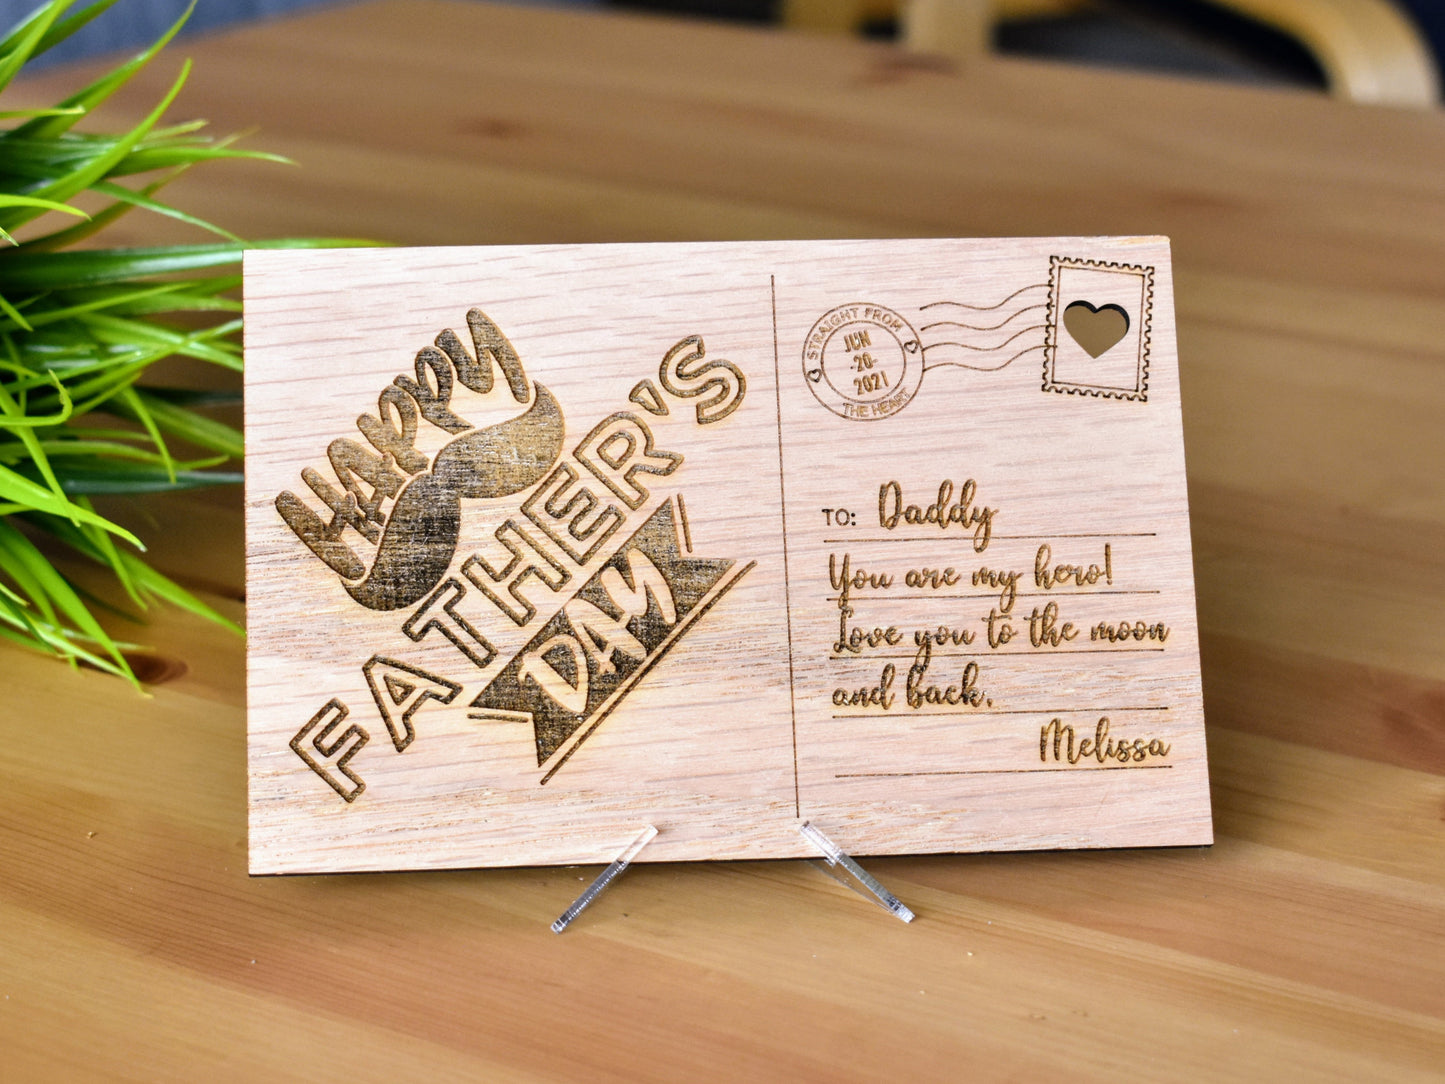 Personalized Wooden Postcard for Dad